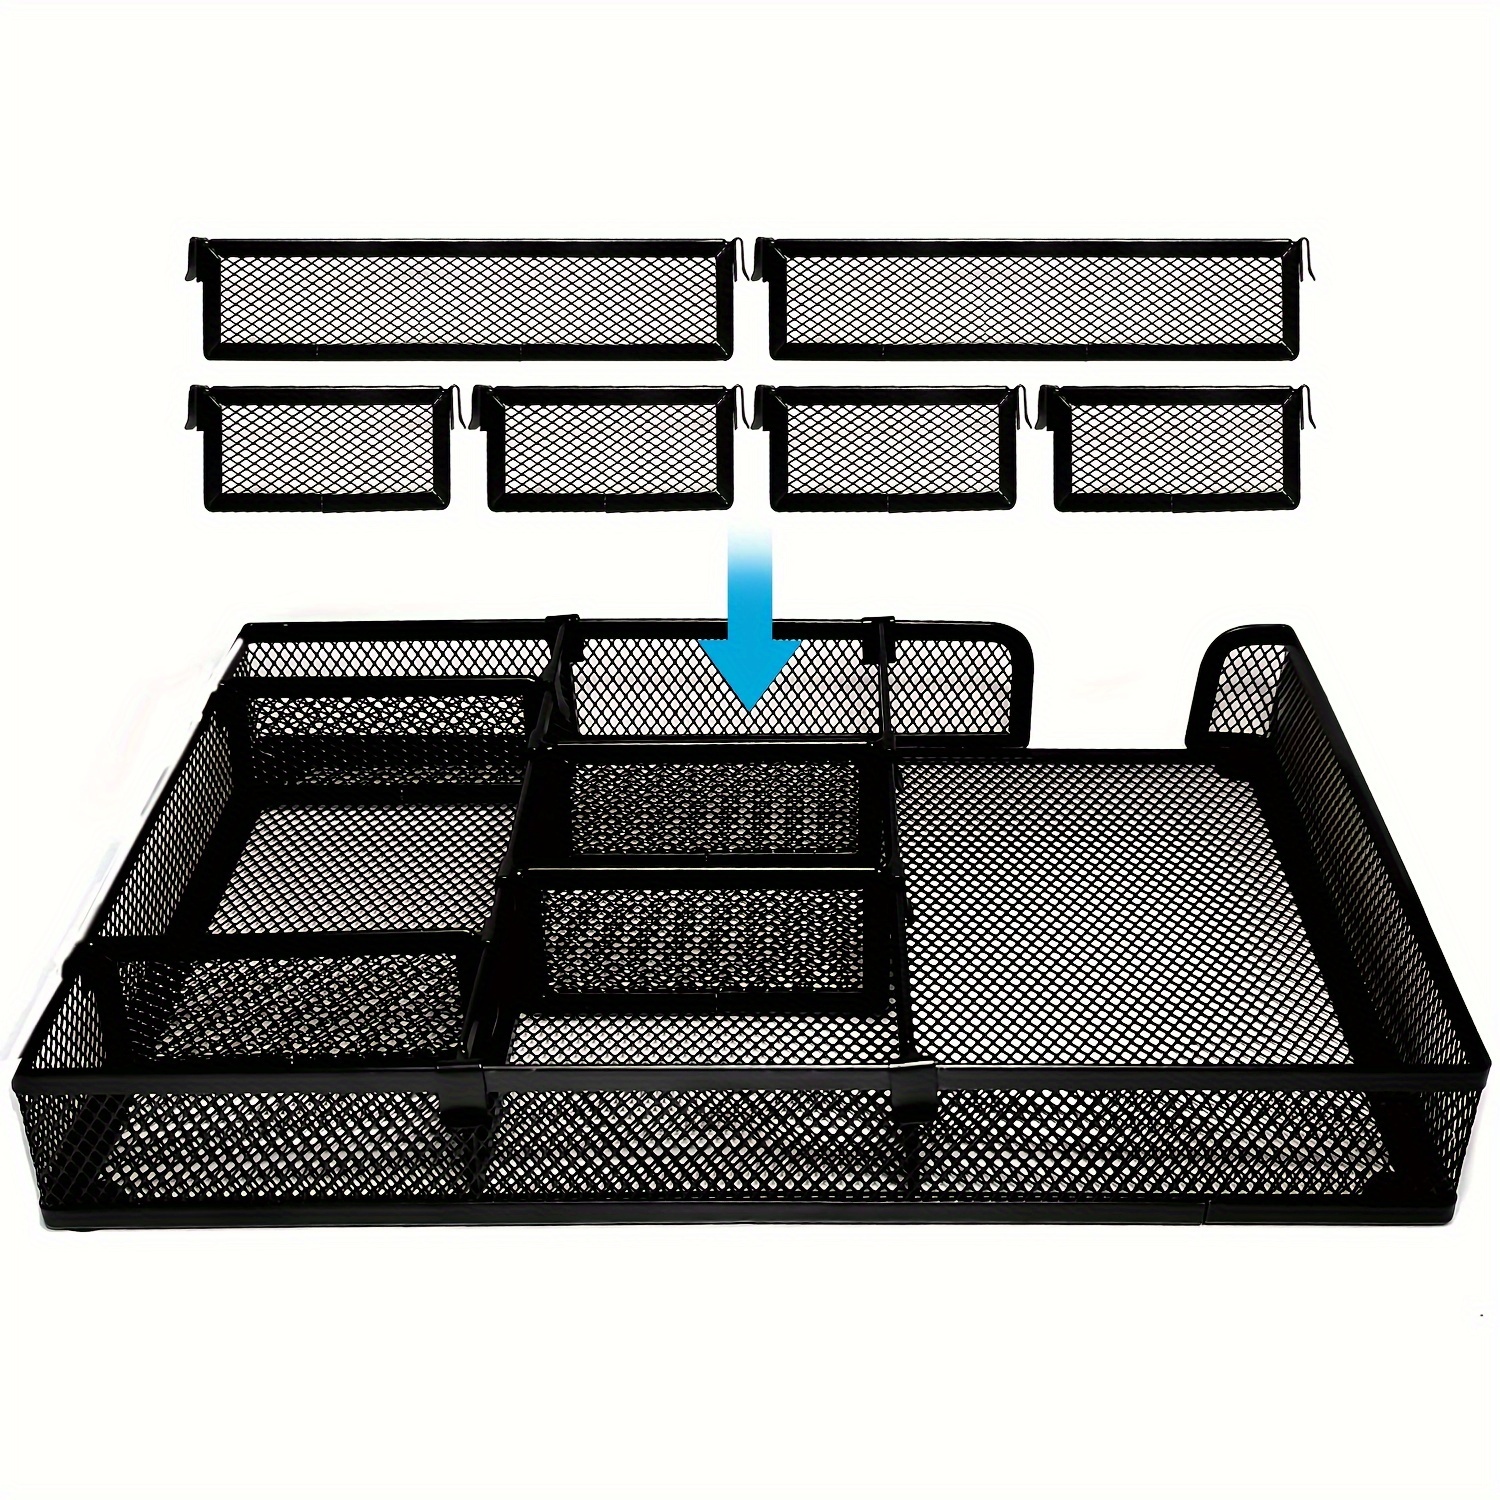 

[2024 New] Desk Drawer Organizer Tray With 6 Adjustable Compartments, Multi-use Metal Mesh File Organizer Office Desk Accessories For Home Office School, 12.60 X 8.66 X 1.77 Inches